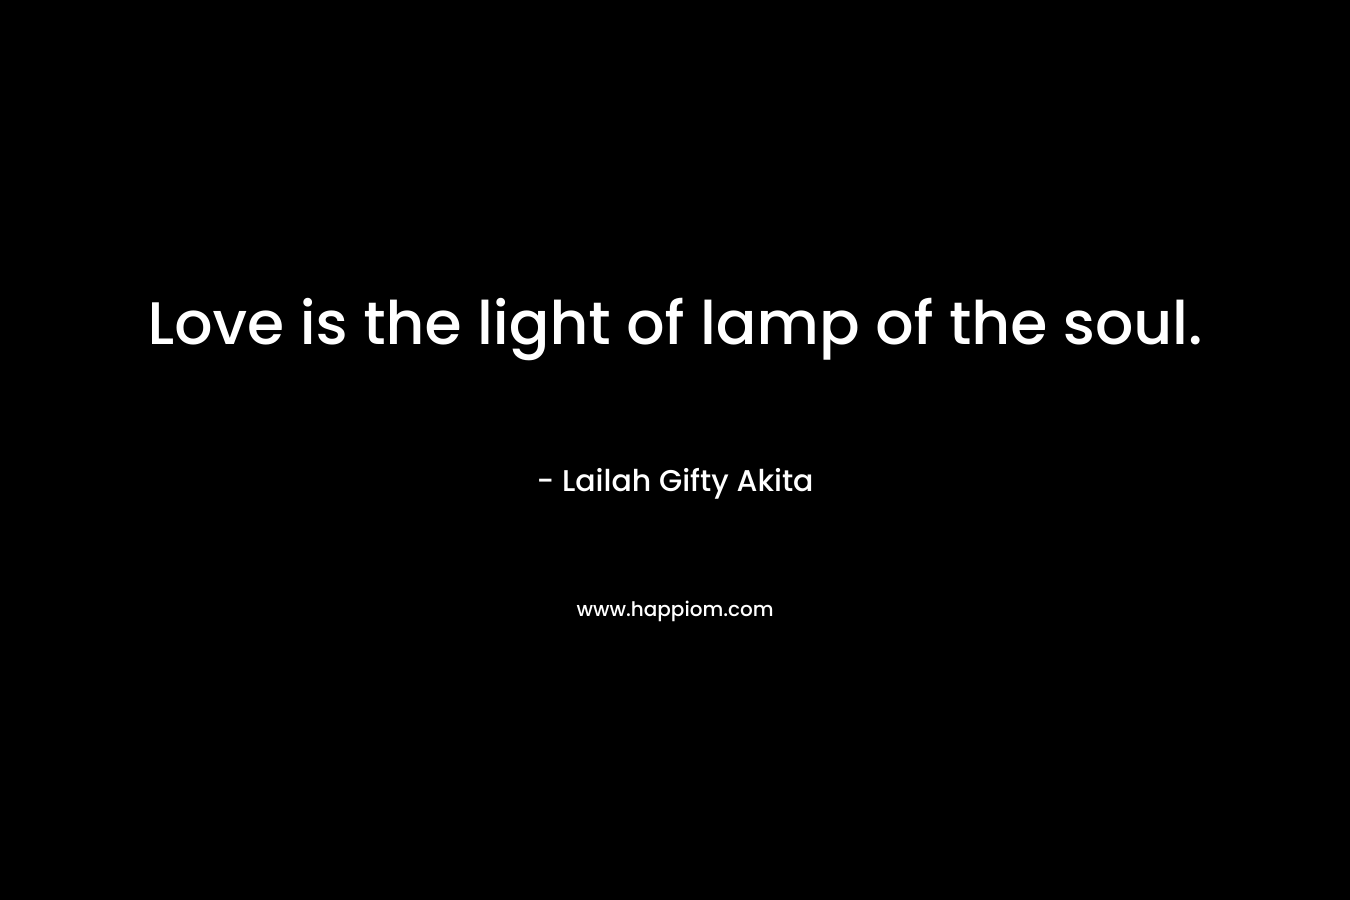 Love is the light of lamp of the soul.